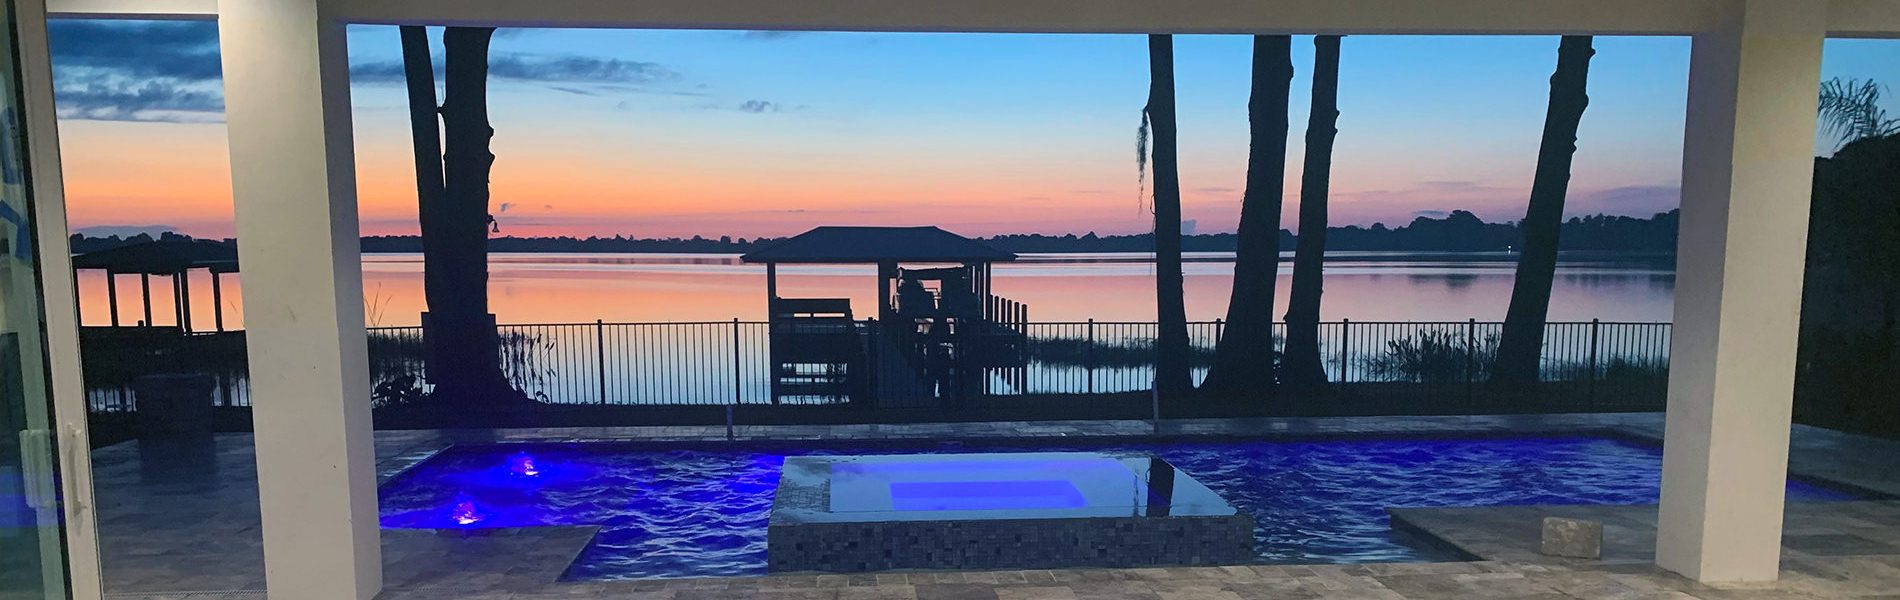 Sunset at 3820 Gaines Rd, Winter Haven, FL - Blue Sun Realty - Lake Eloise Lake House